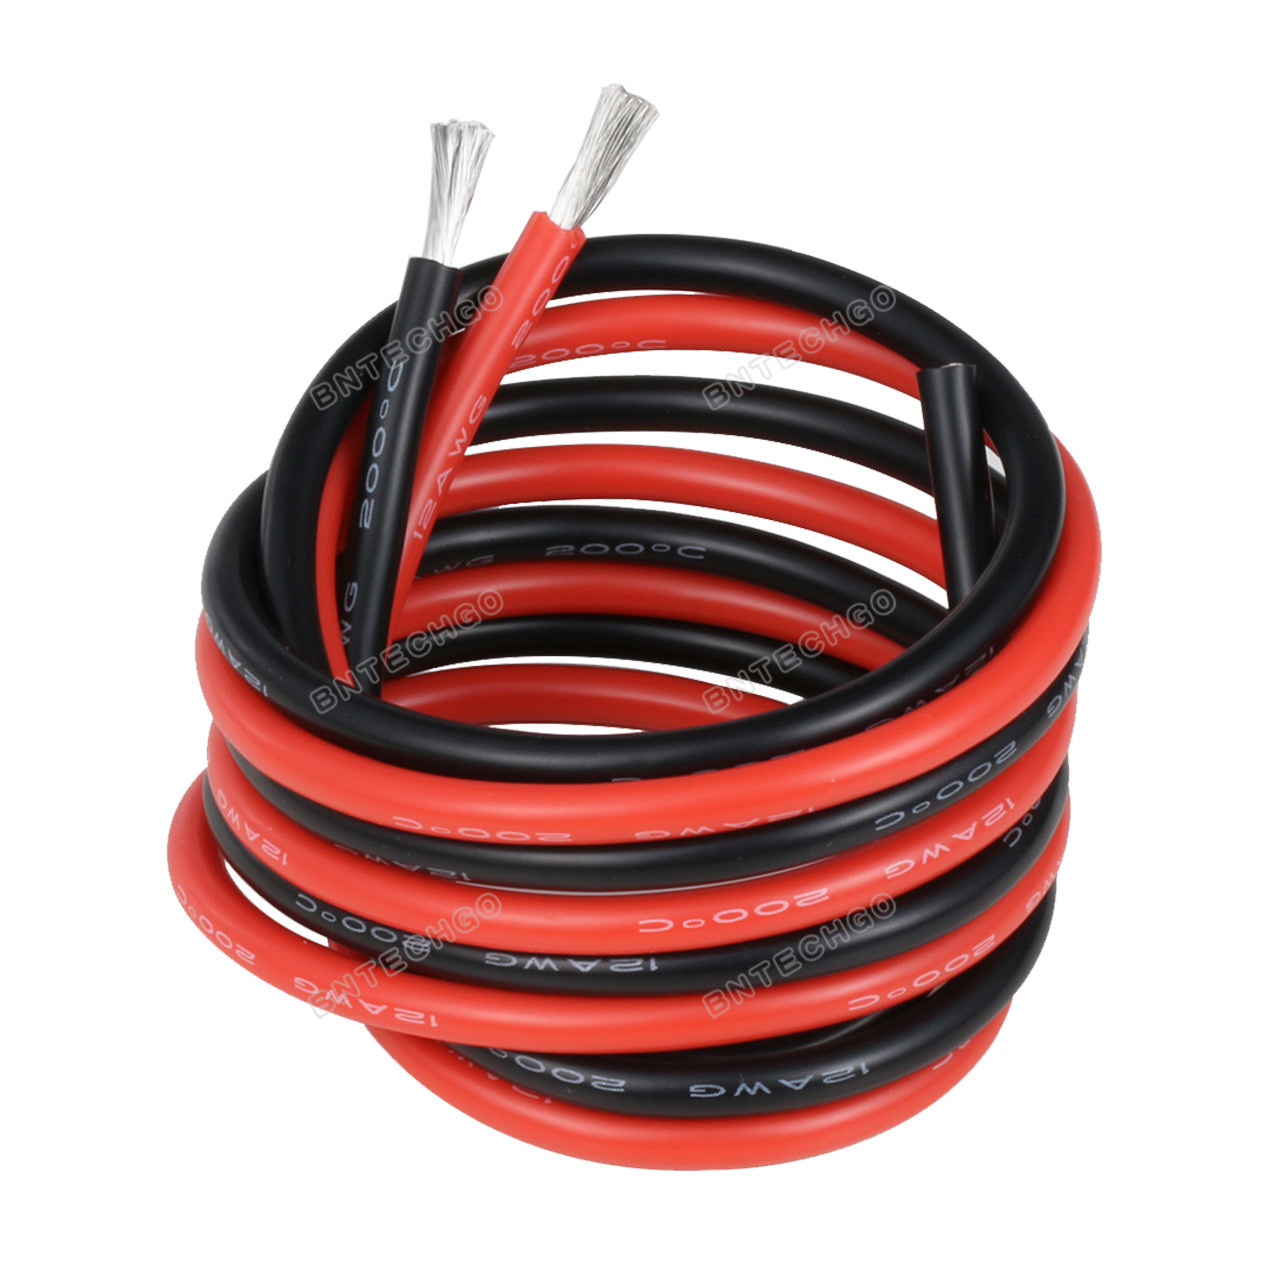 BNTECHGO 28 Gauge Silicone Wire Spool 50 feet(25 ft Black and 25 ft Red)  Ultra Flexible High Temp 200 deg C 600V 28 AWG Stranded Tinned Copper Wire